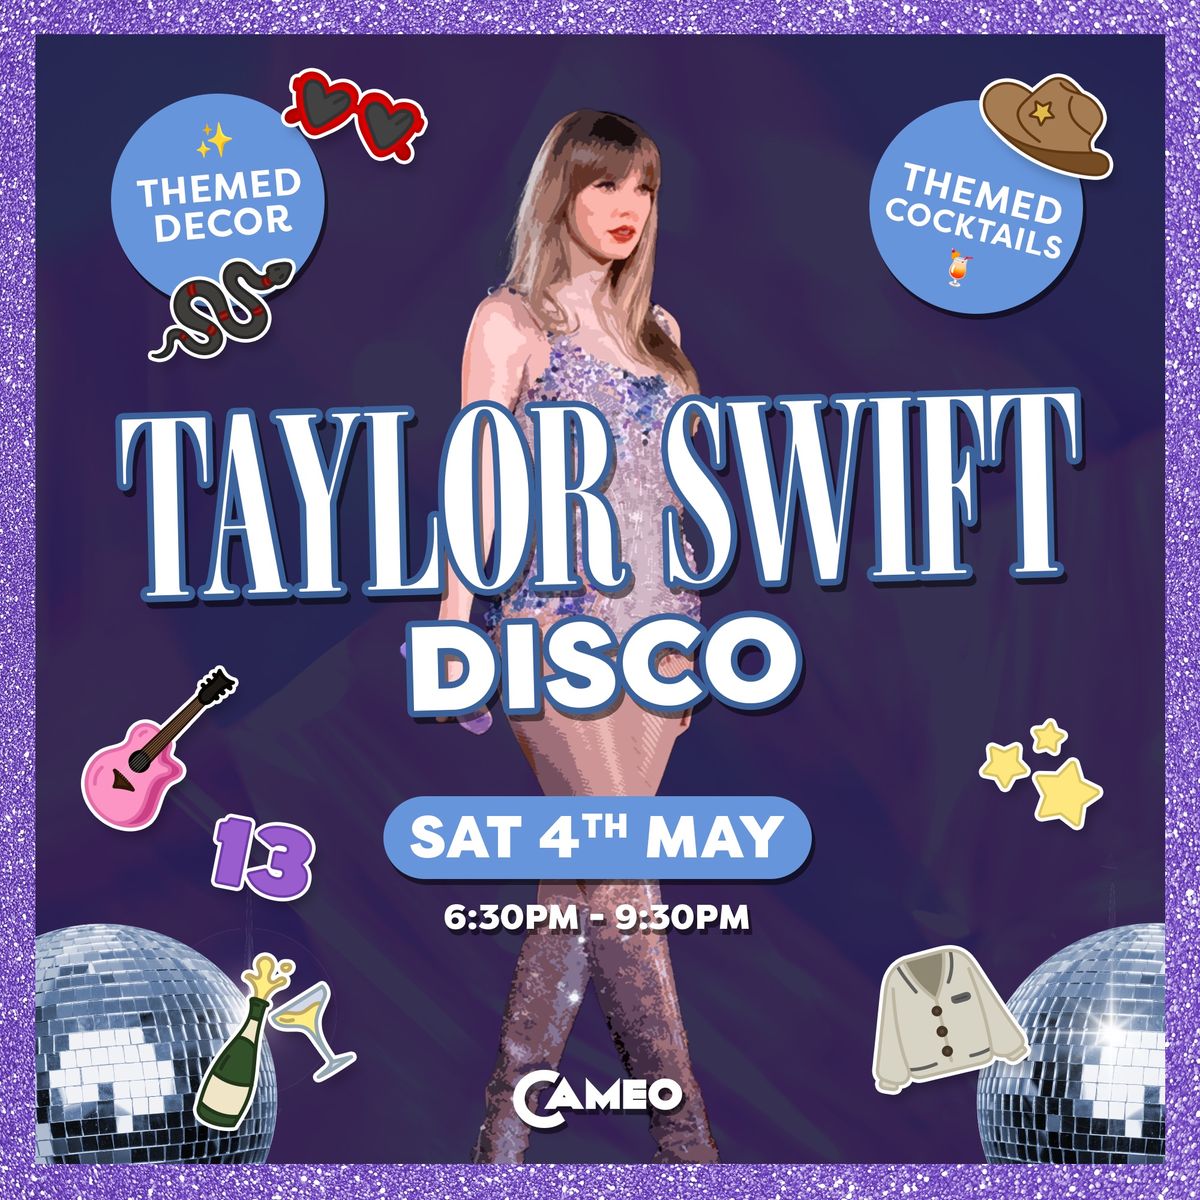 TAYLOR SWIFT DAY DISCO